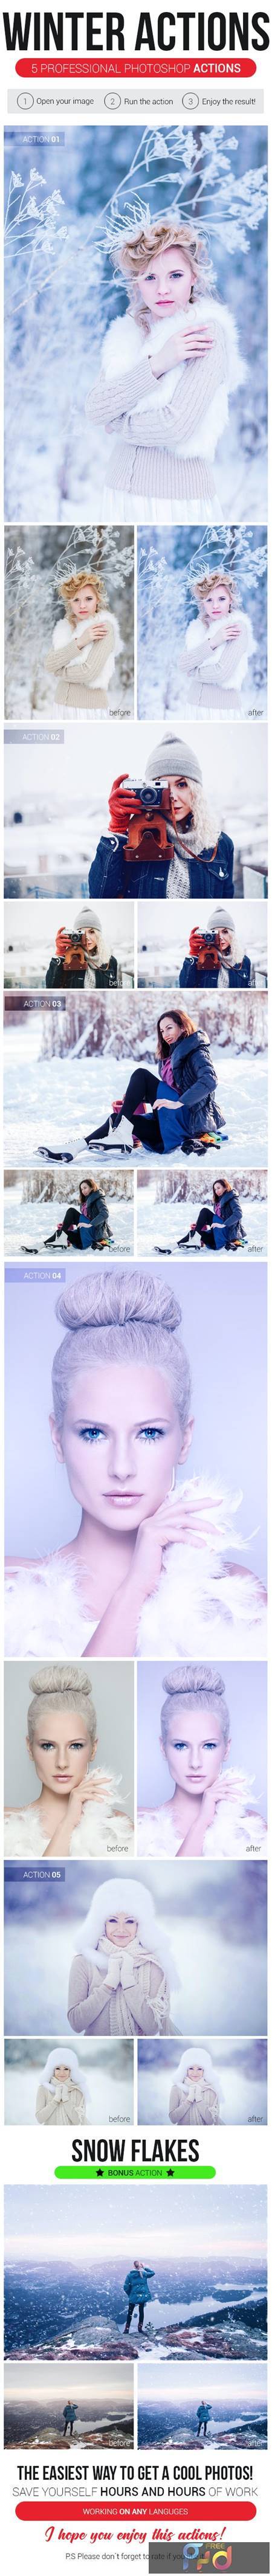 5 Professional Winter Actions + Snow Flakes Action 21058724 1